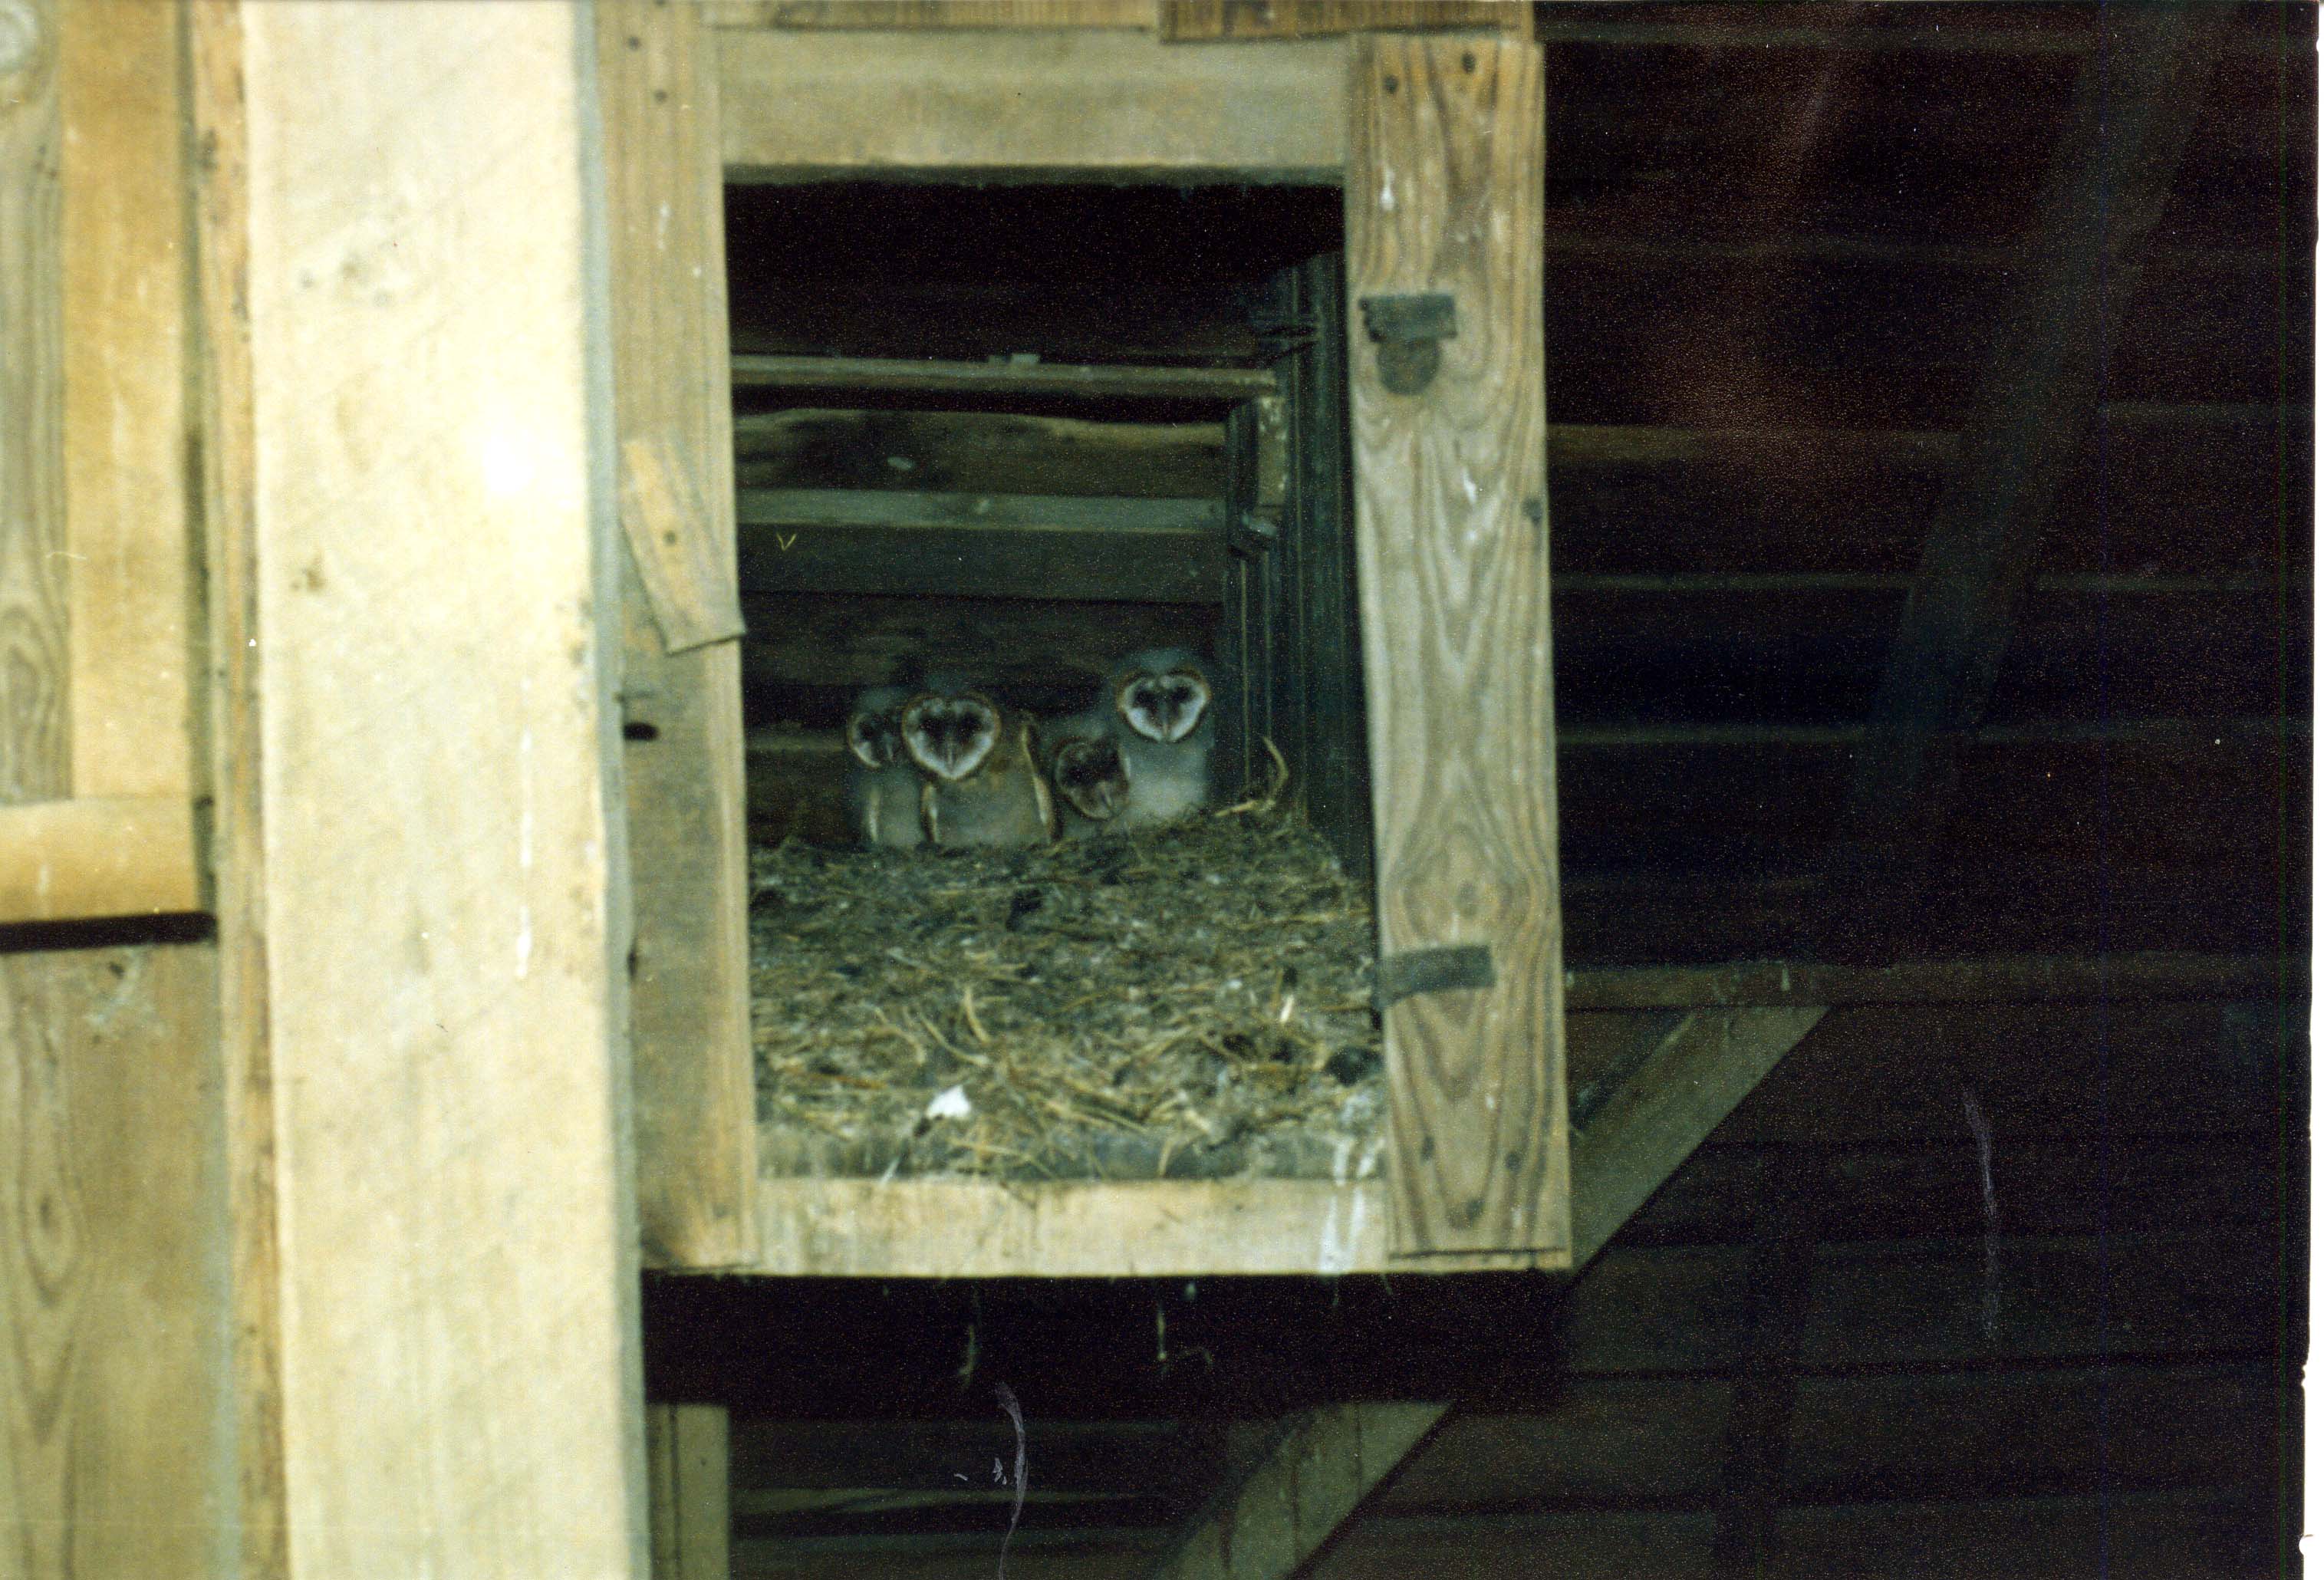 Doug Reeves letter and photograph to W. Ross Silcock regarding Breeding Bird Atlas special documentation forms and a Barn Owl nest, February 12, 1987